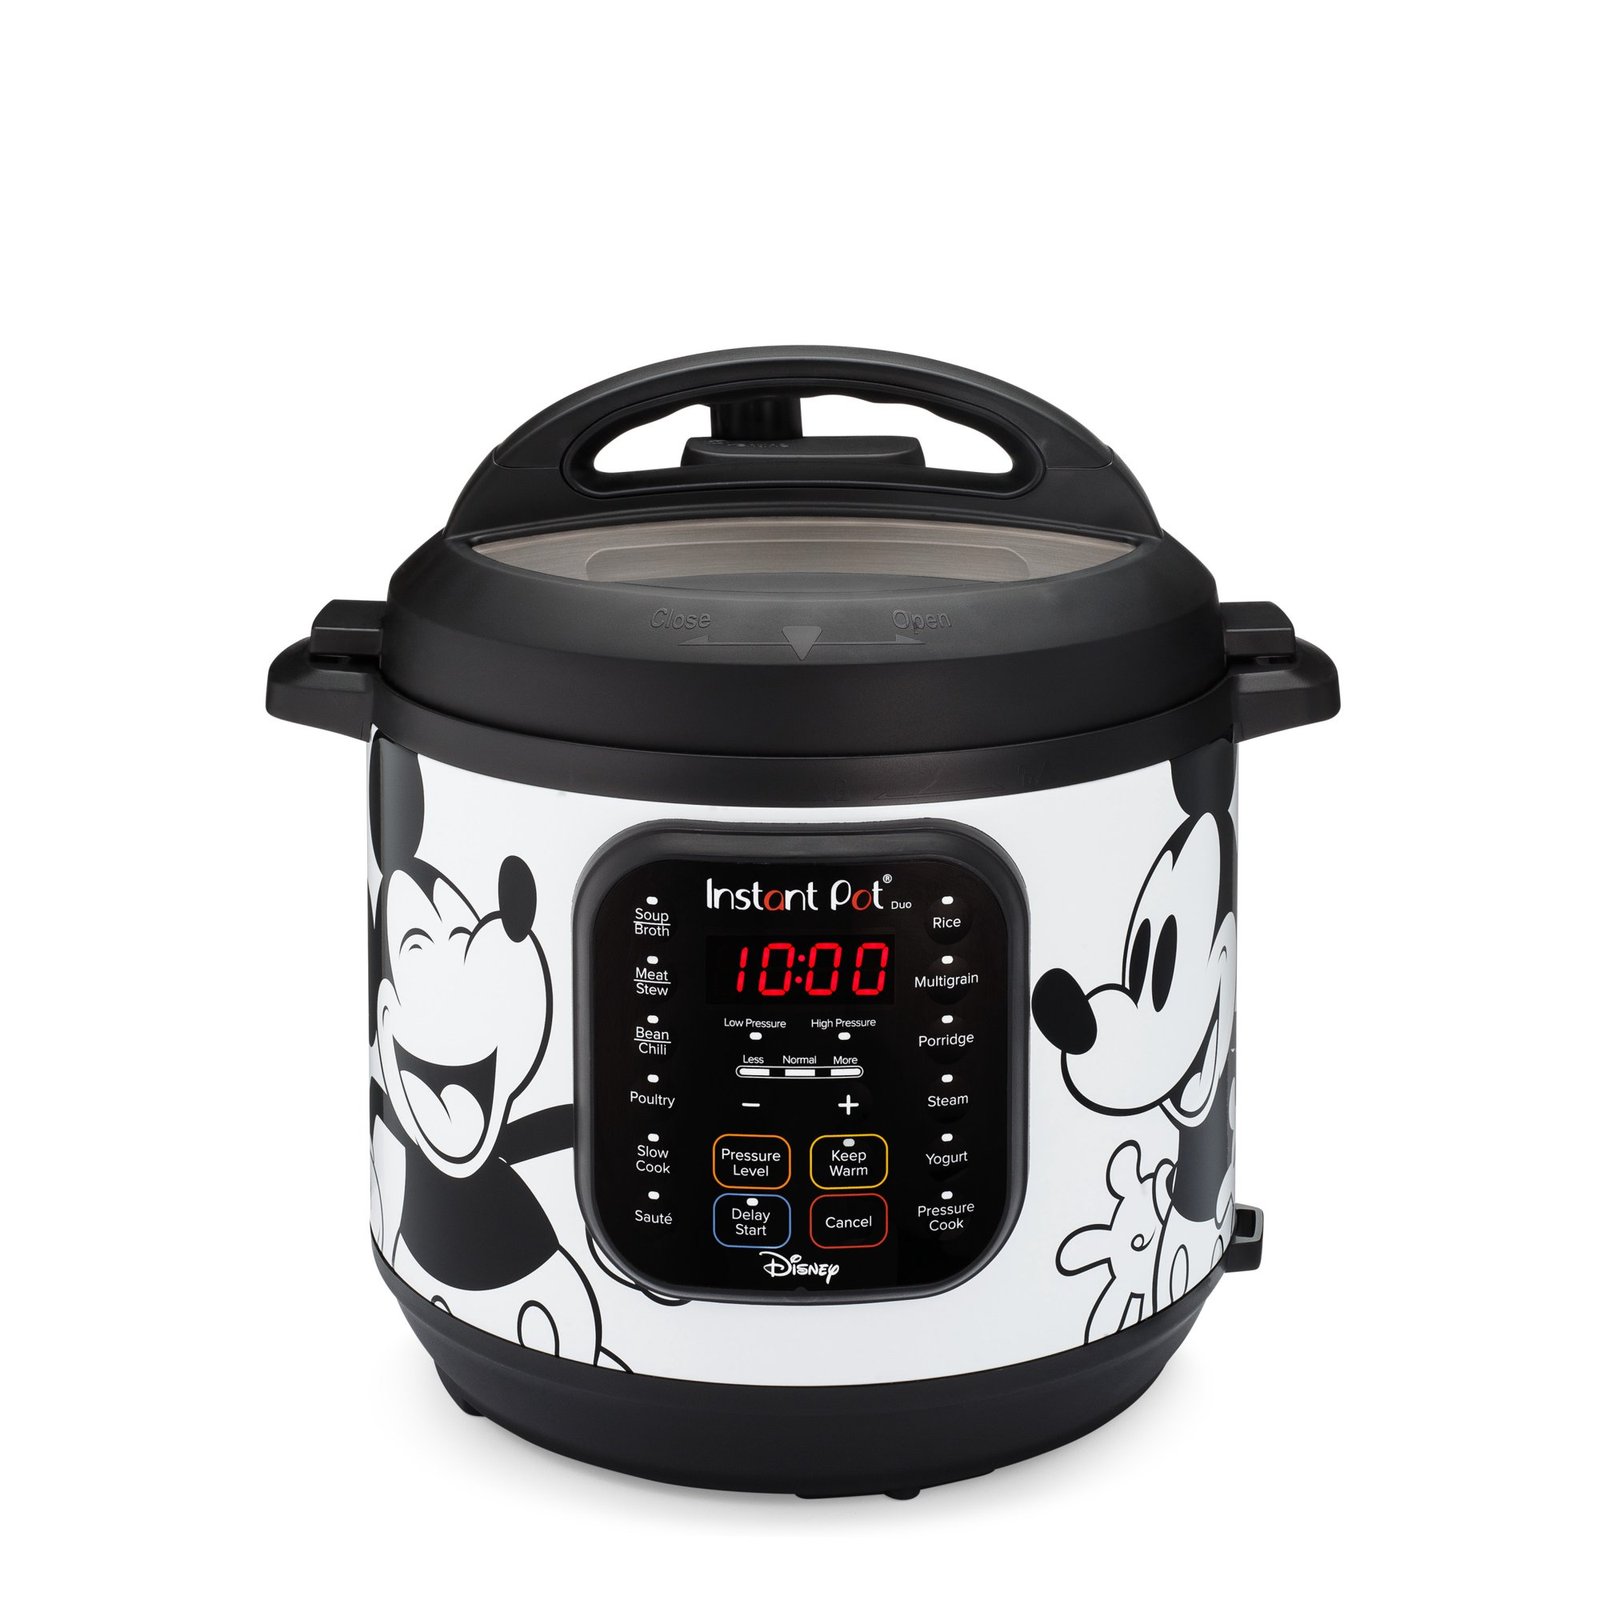 Electric Pressure & Slow Cookers for Rice & More